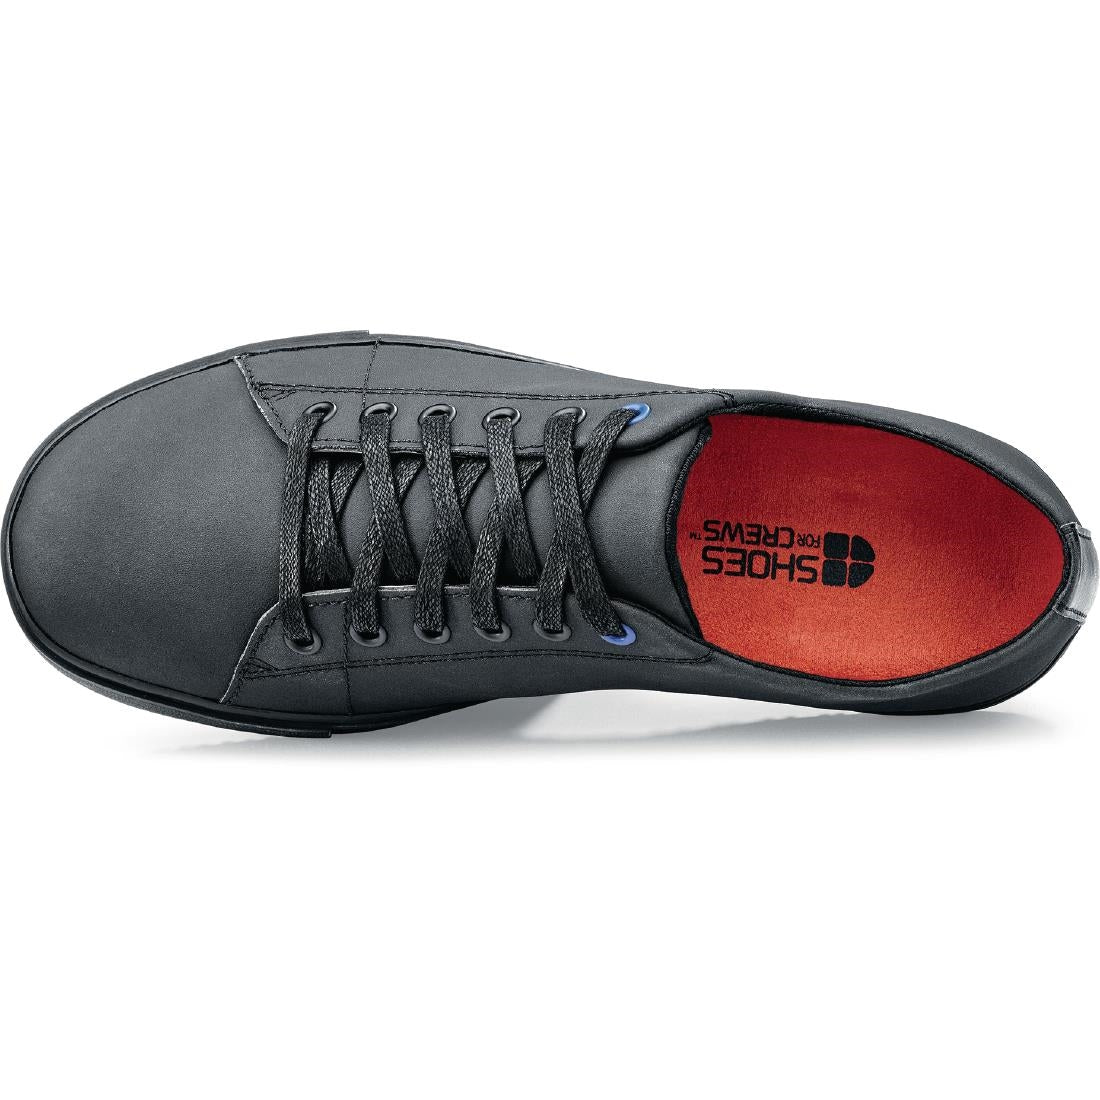 BB161-47 Shoes for Crews Mens Old School Trainer